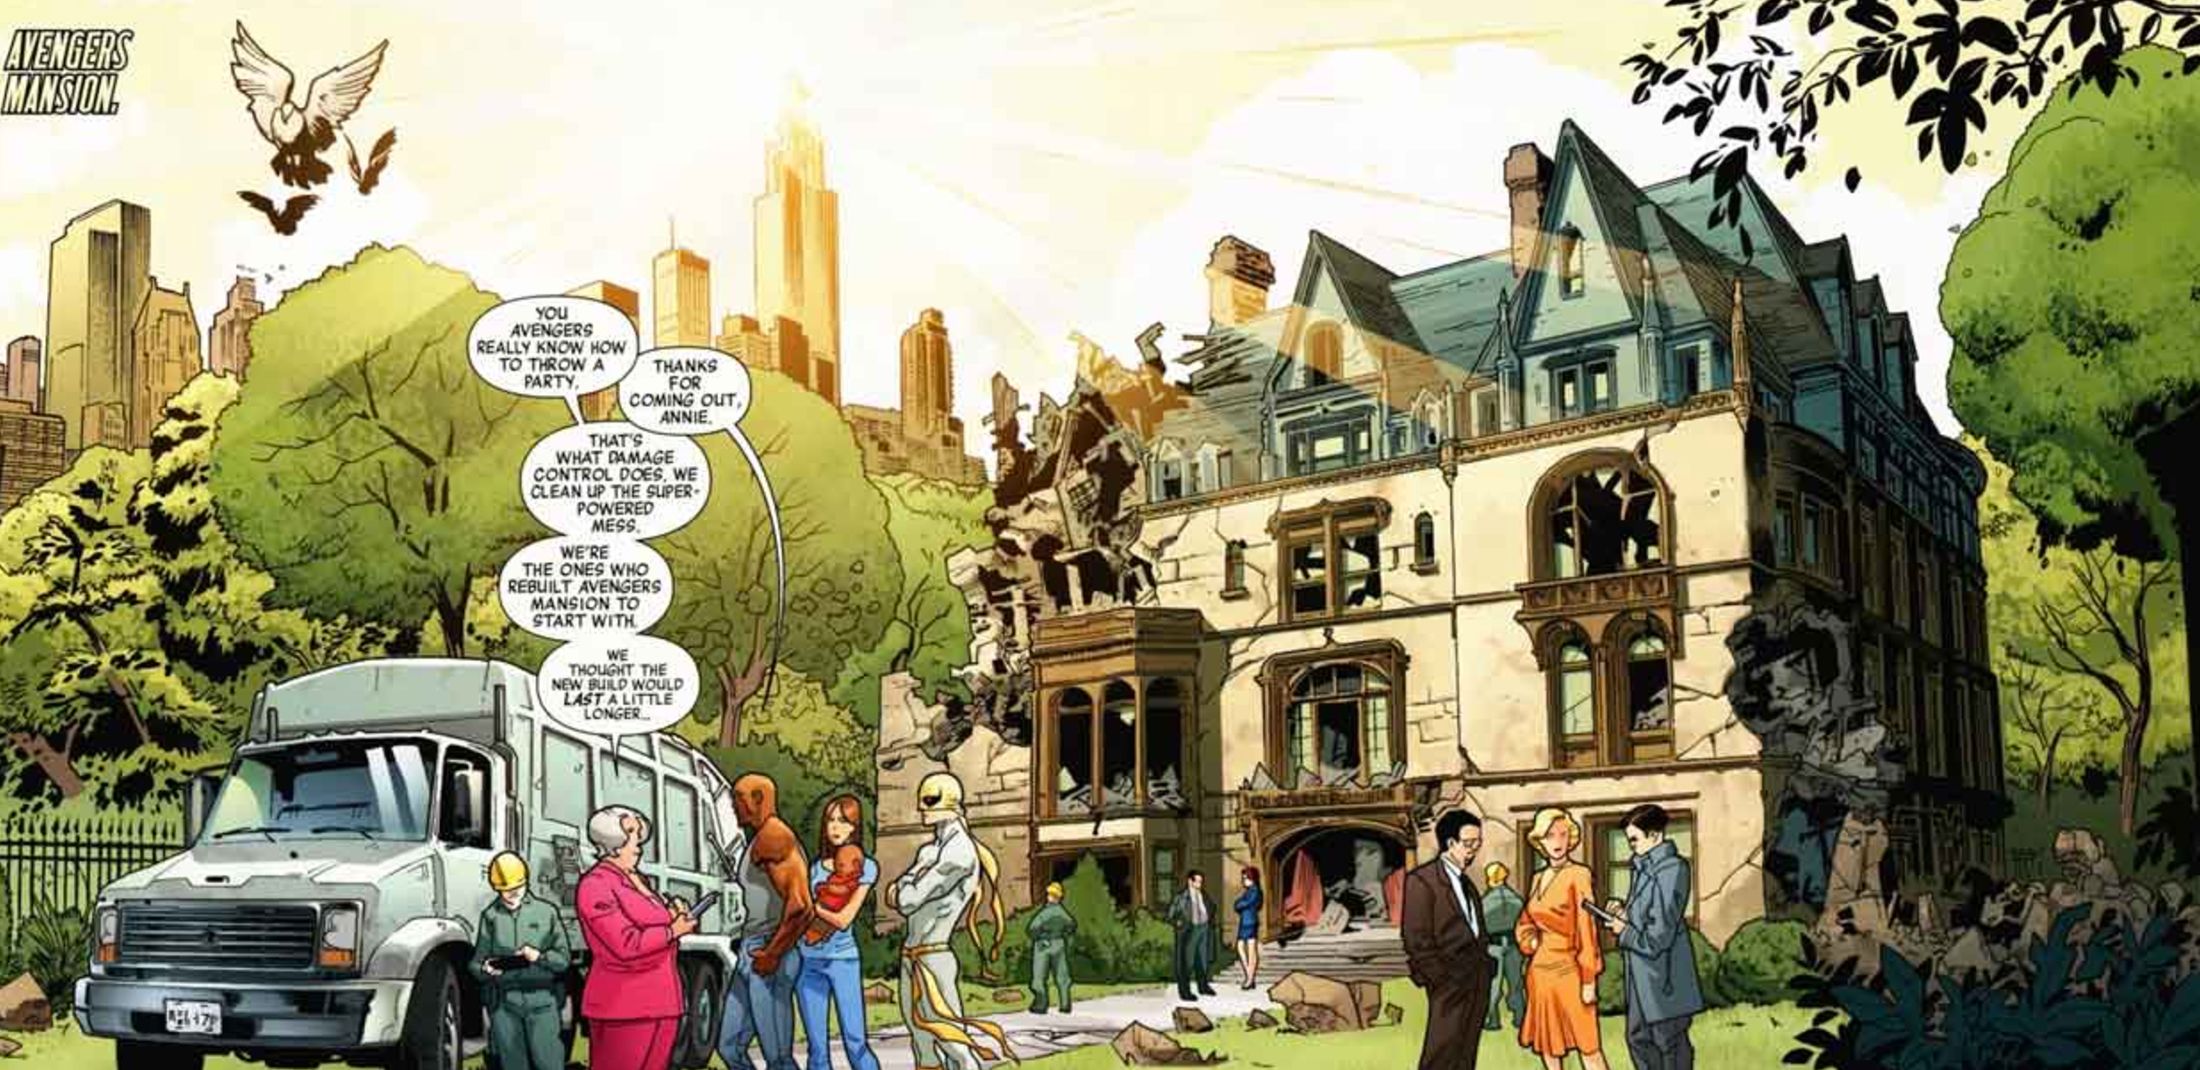 Avengers Mansion With The New Team and Damage Control in 2010